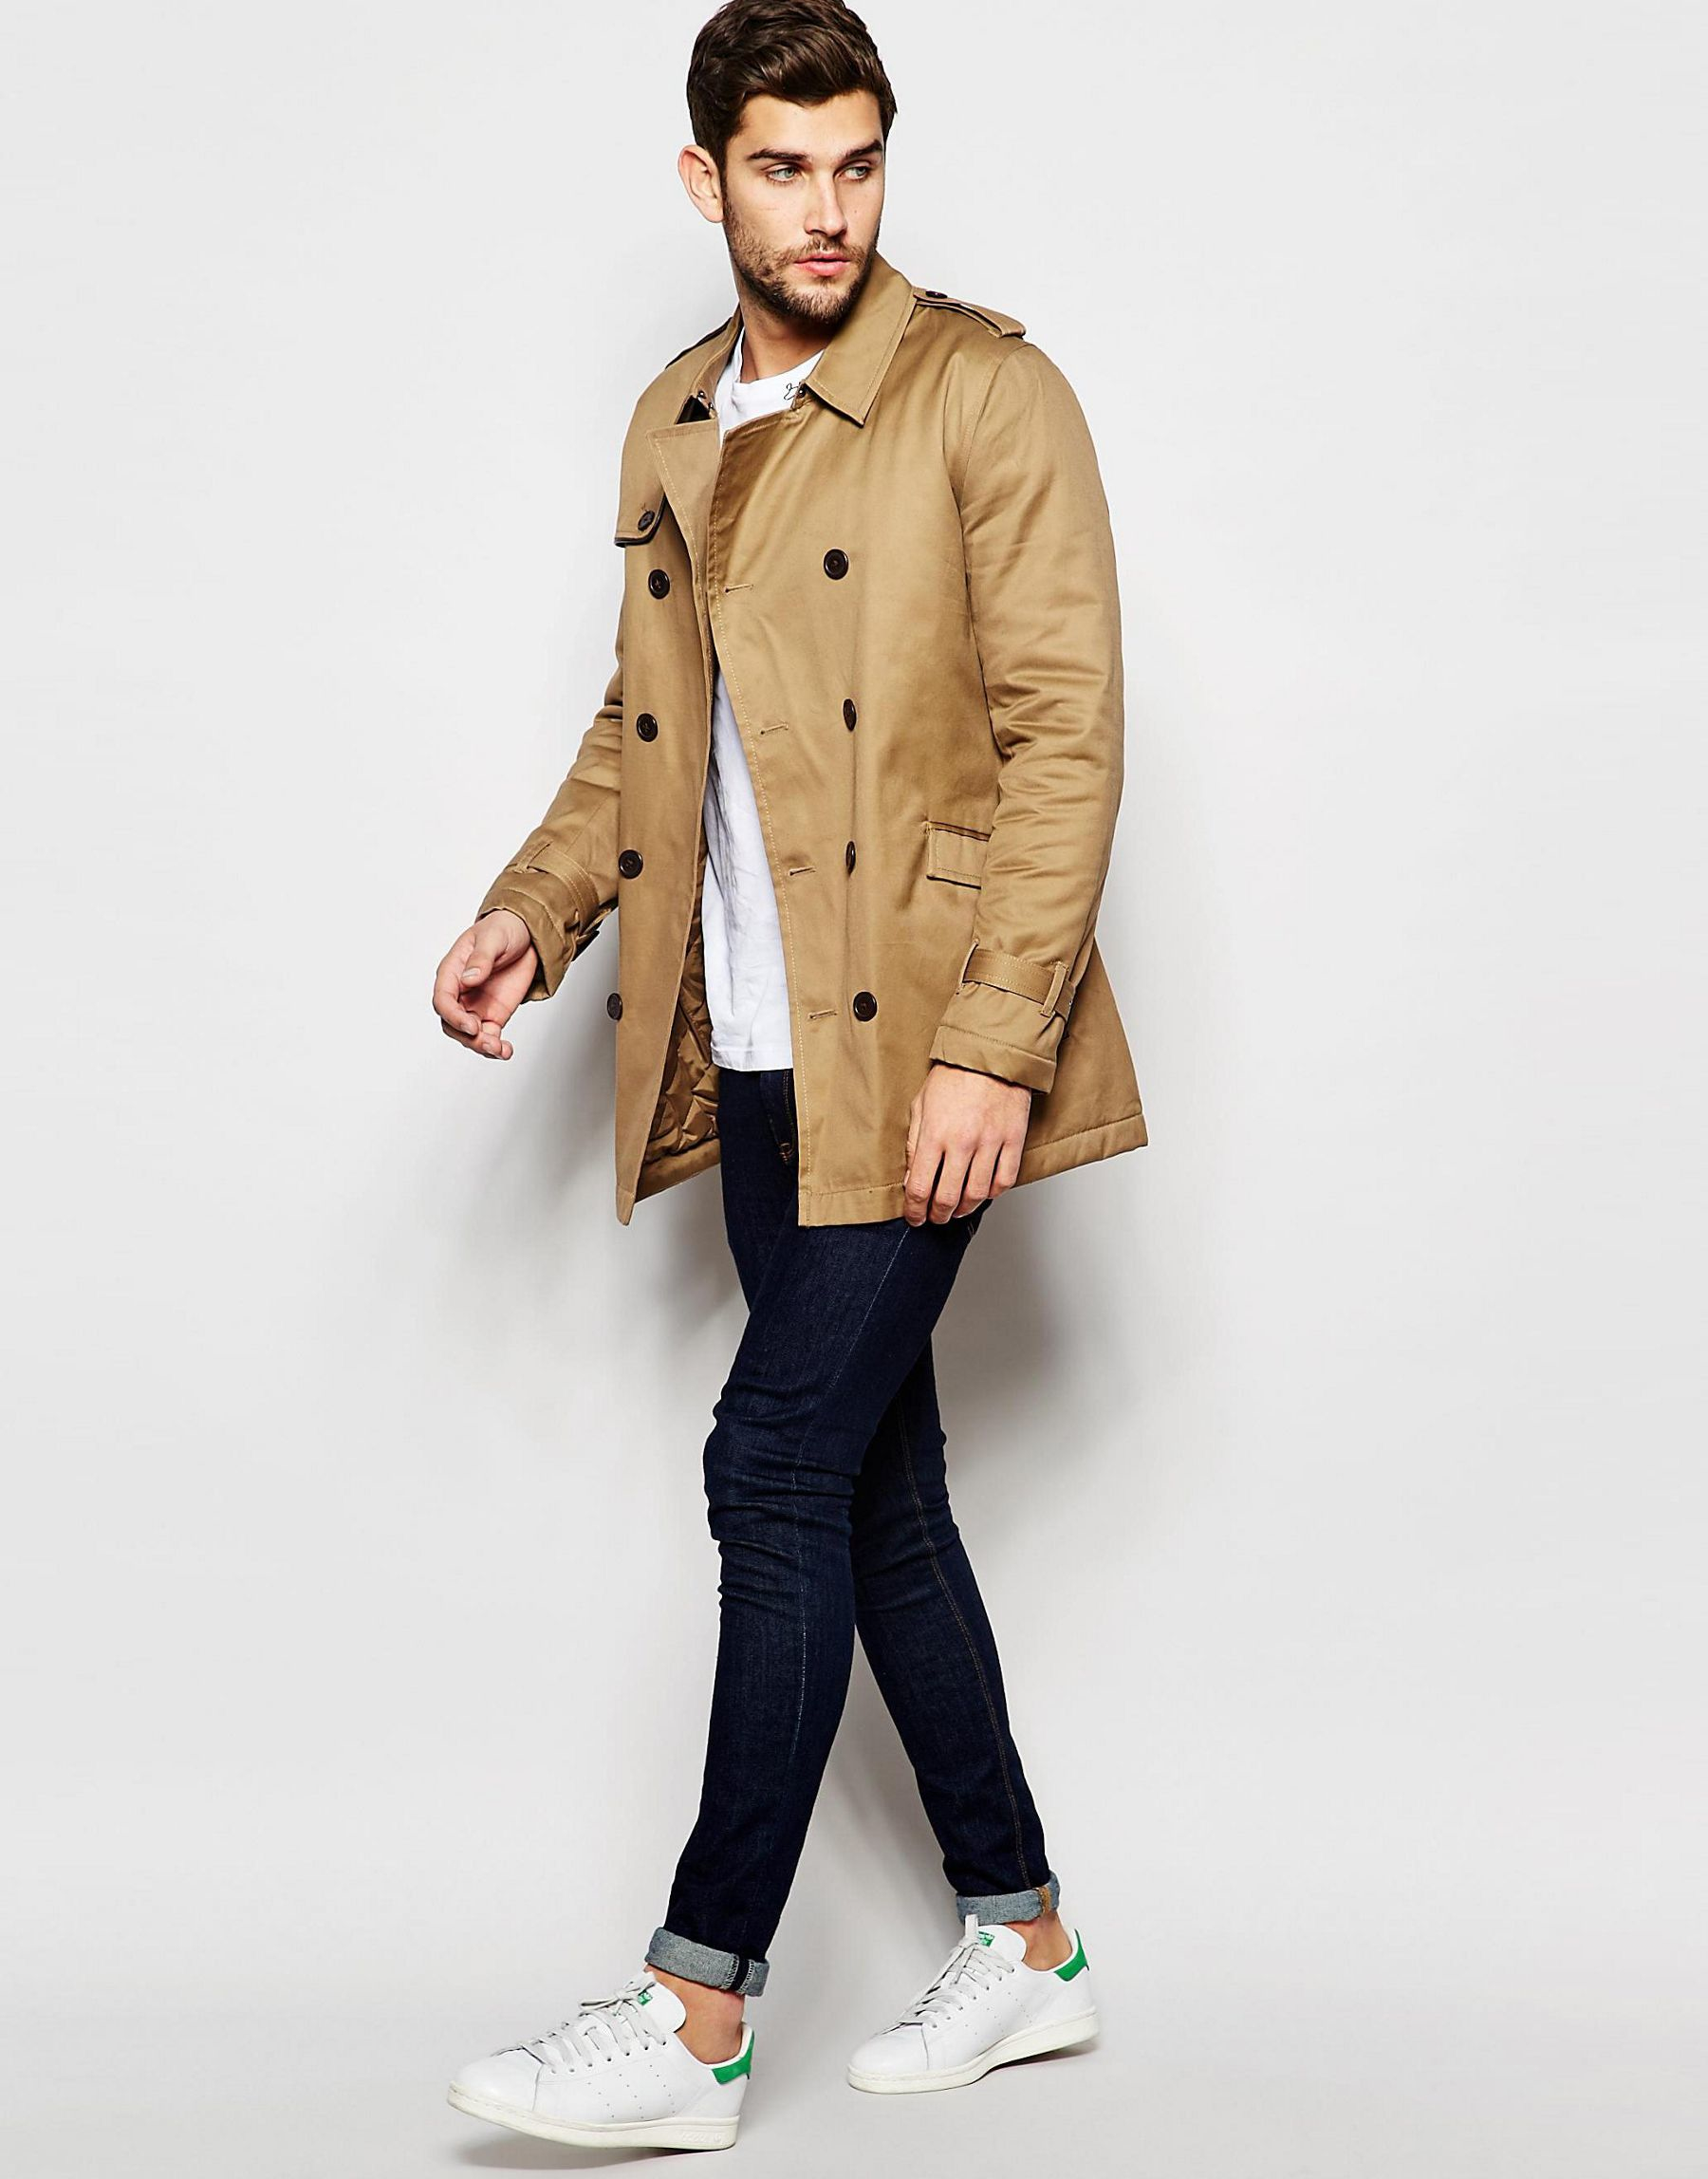 Lyst - Asos Trench Coat With Belt In Tobacco in Brown for Men